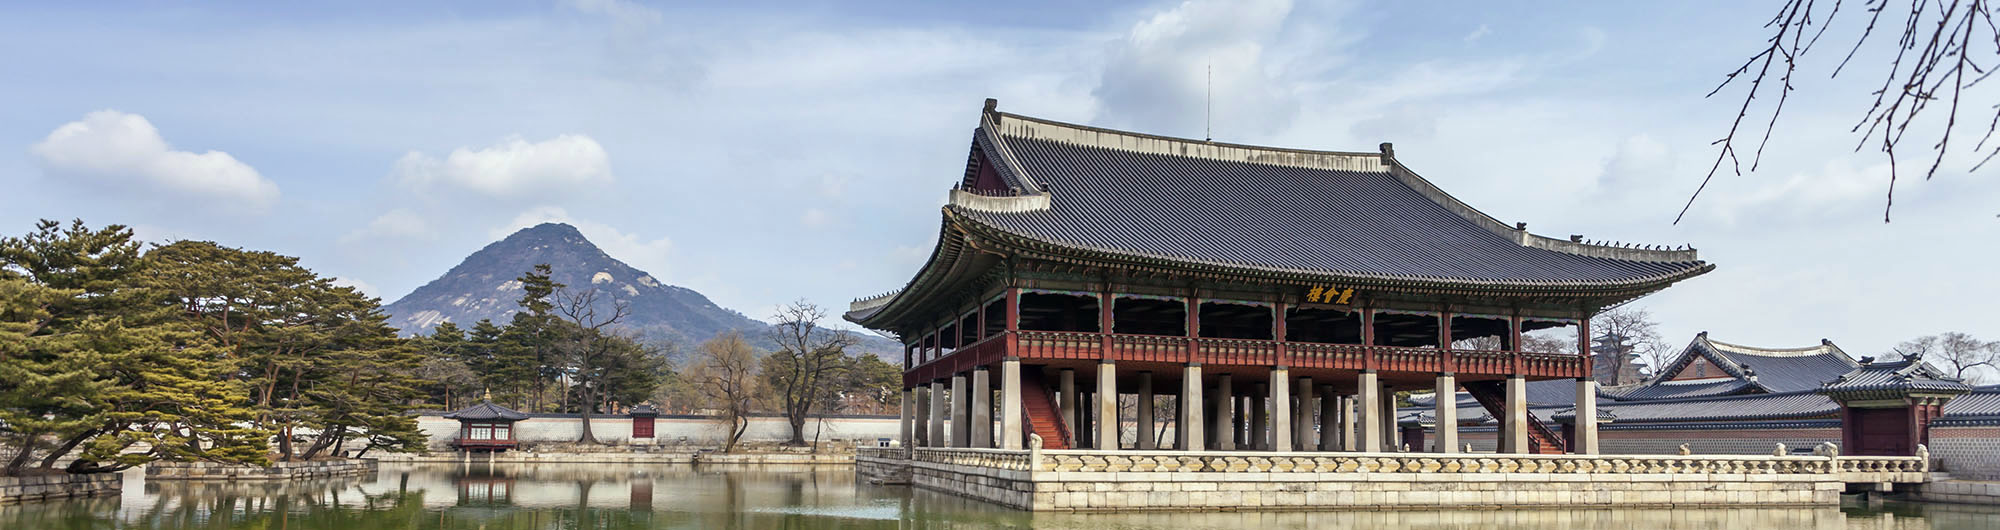 Search and compare cheap flights from Singapore to Seoul